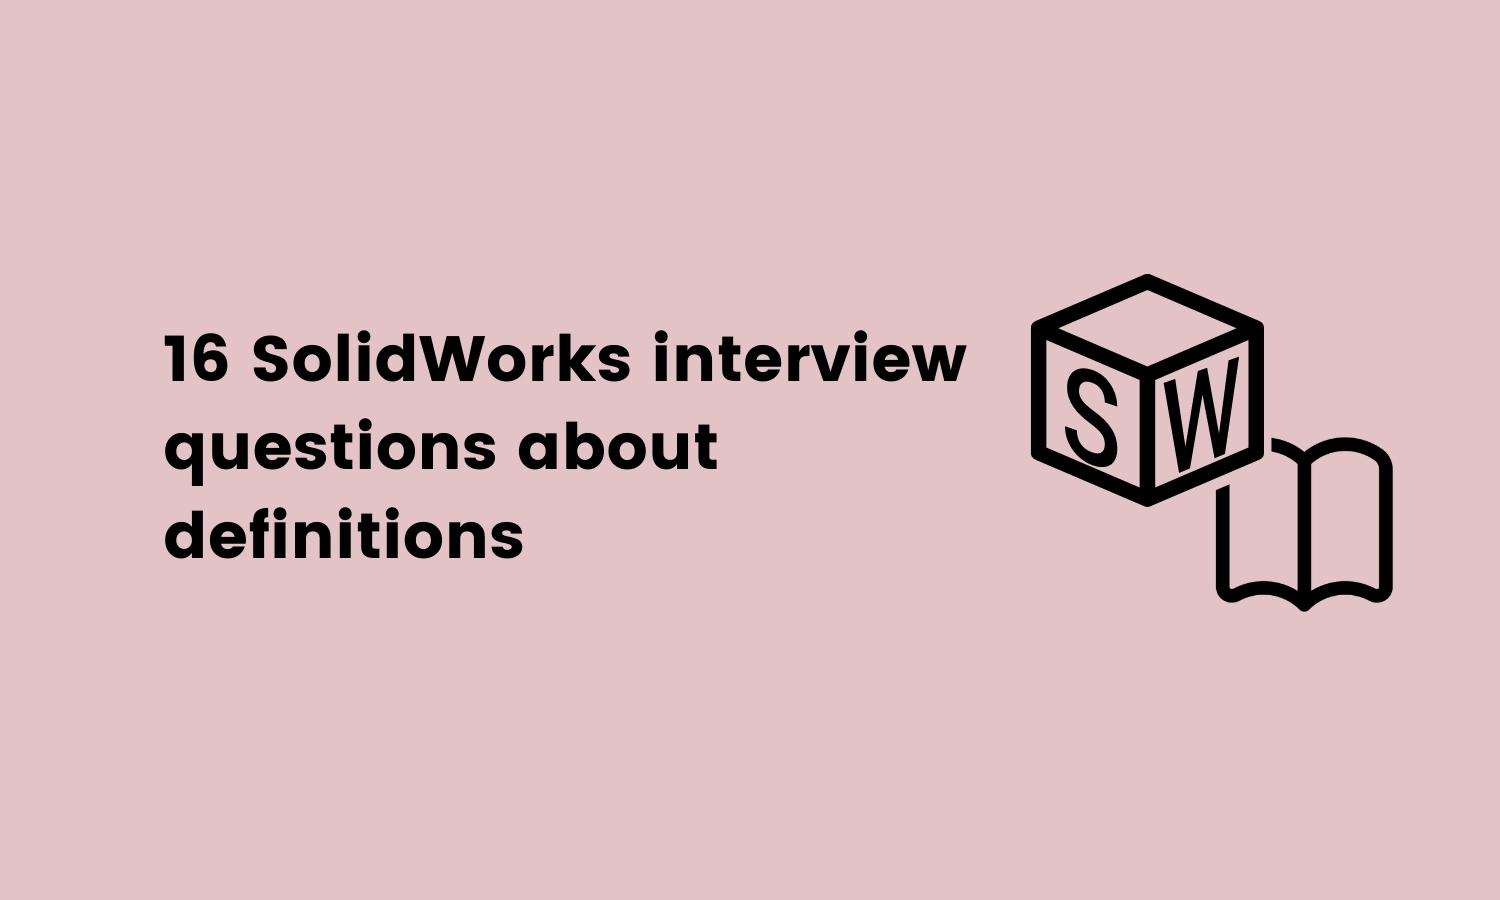 16 SolidWorks interview questions about definitions